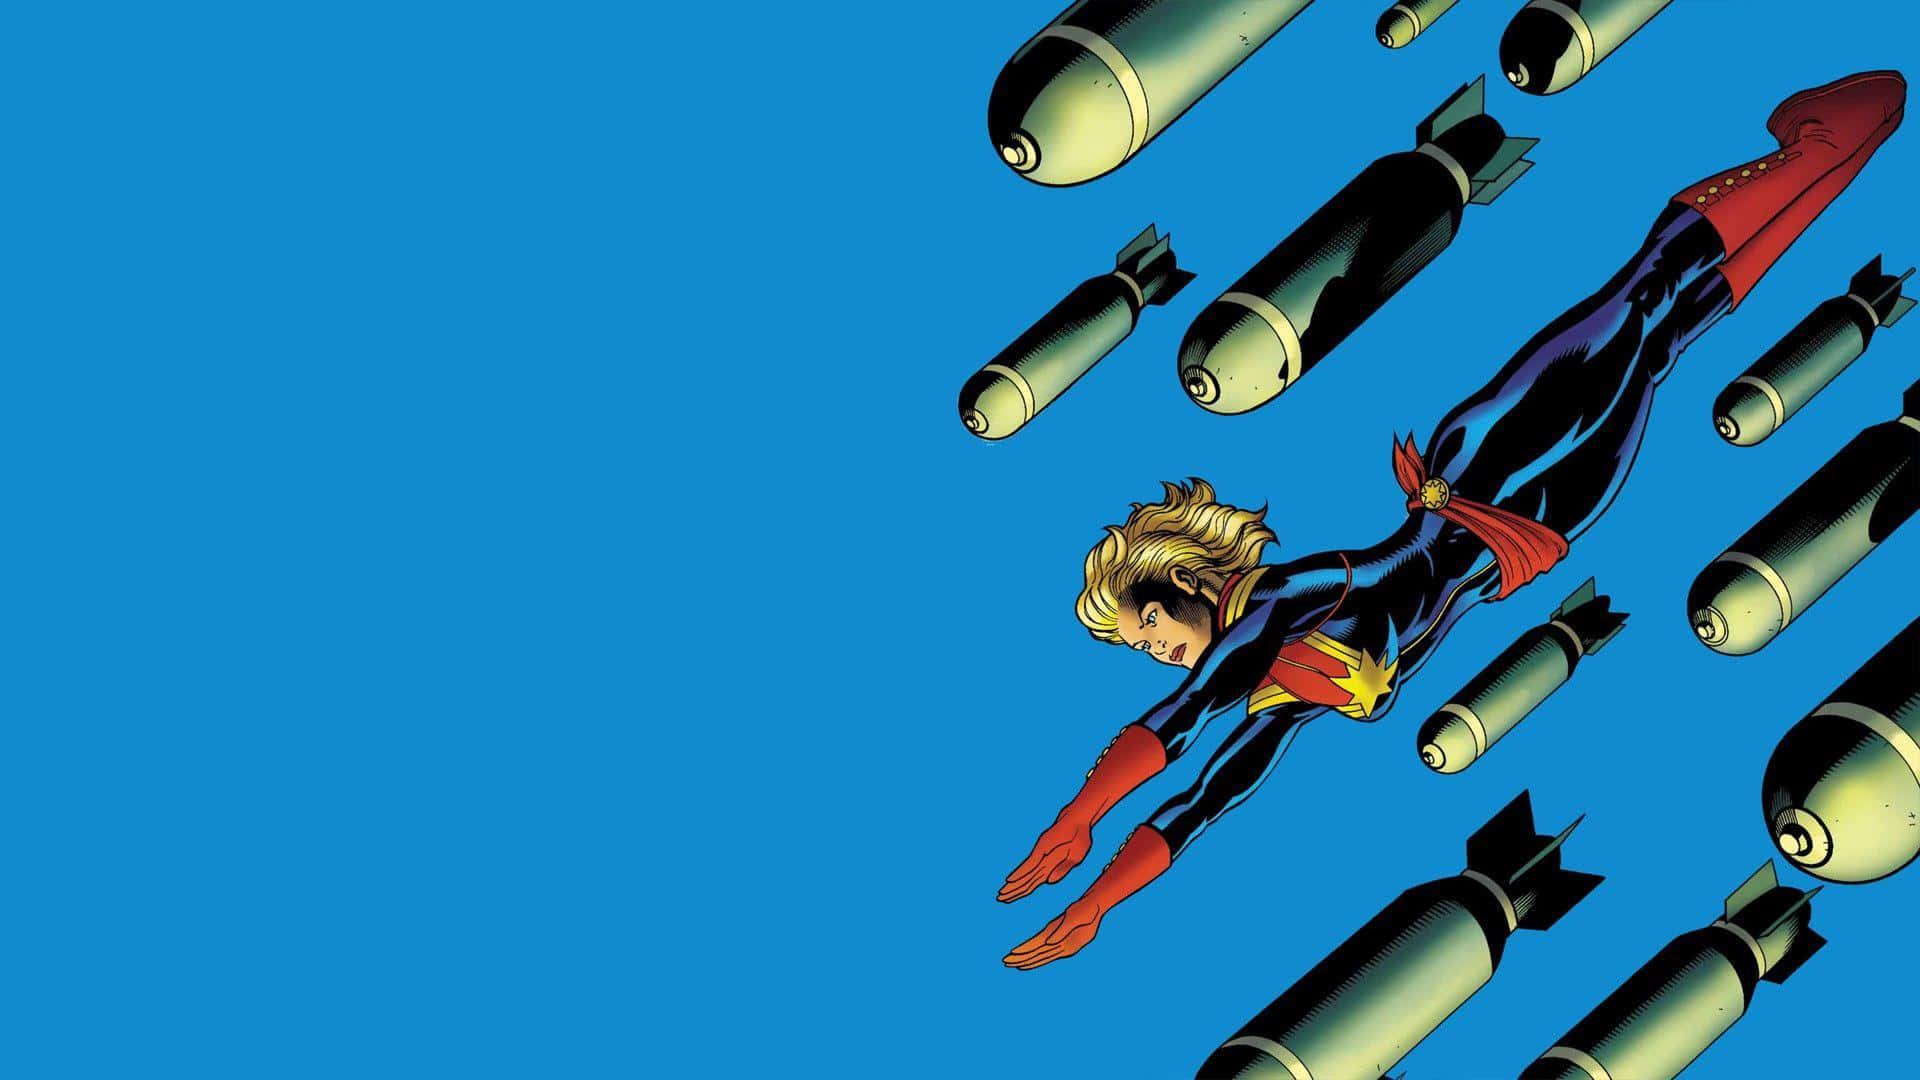 Captain Marvel Takes Flight In Her Powerful Suit In This Hd Wallpaper